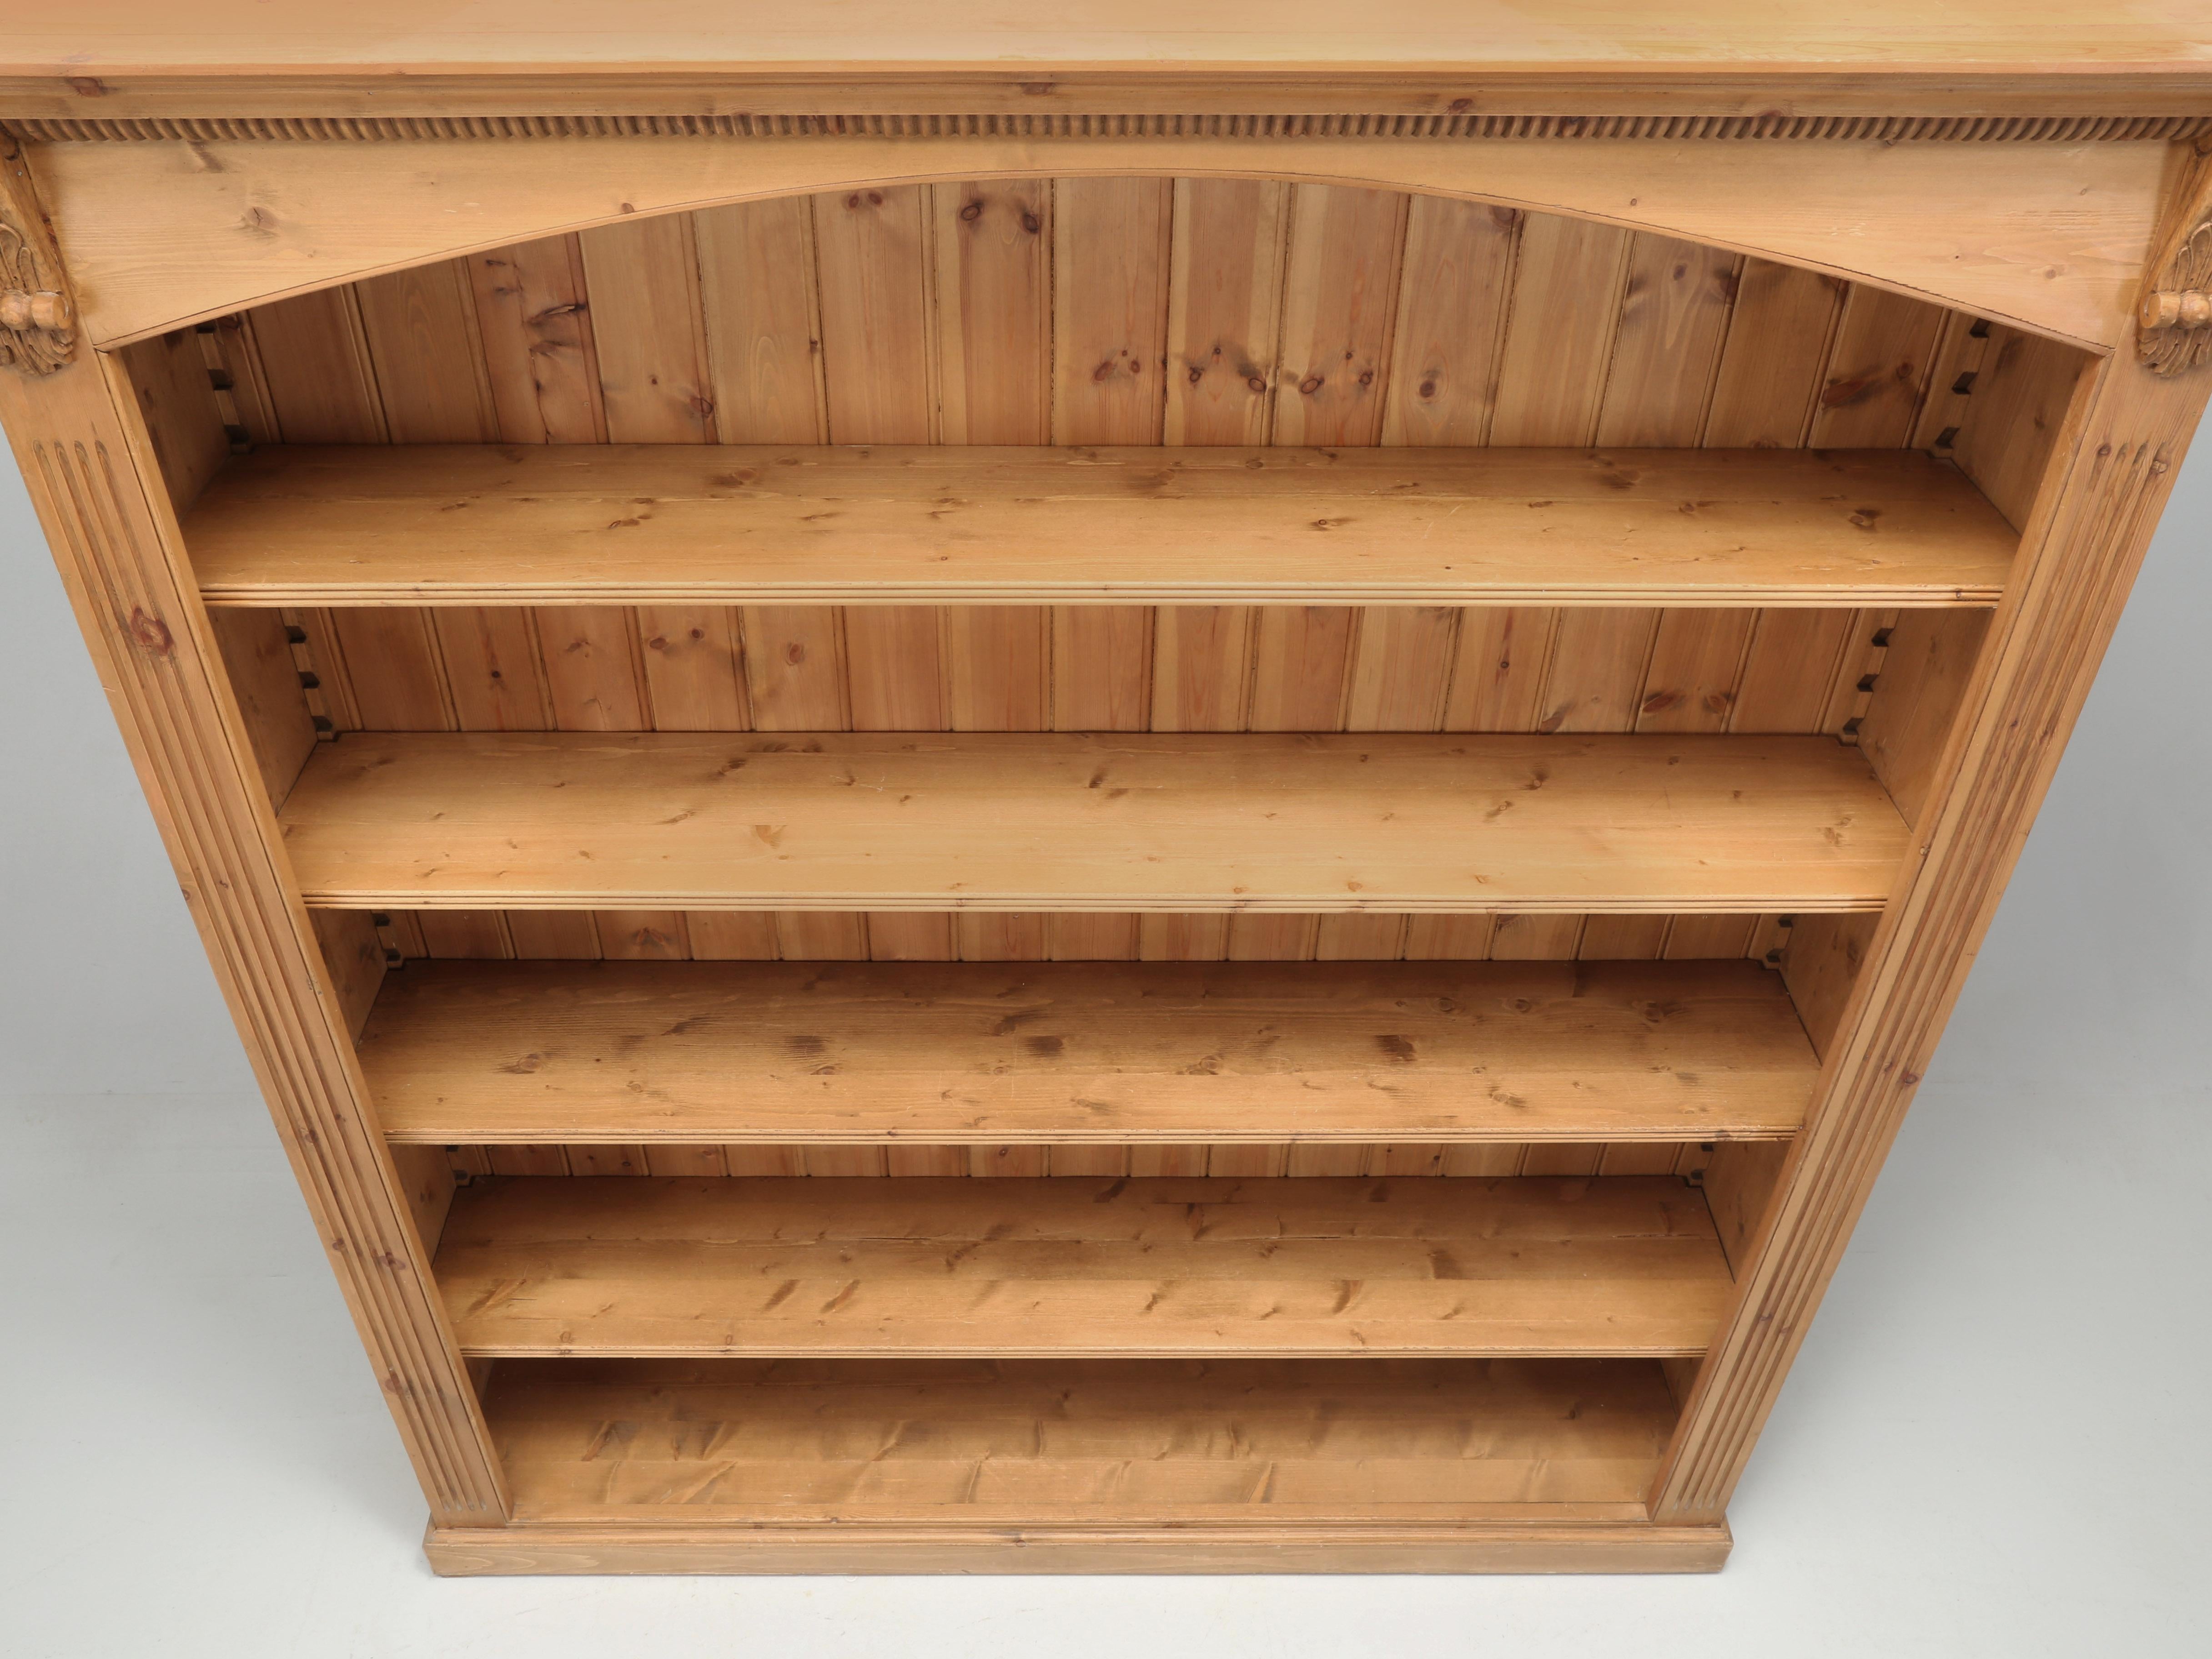 English Pine Bookcase Exceptionally Wide, Traditional Beeswax Finish by Chrispyn For Sale 3